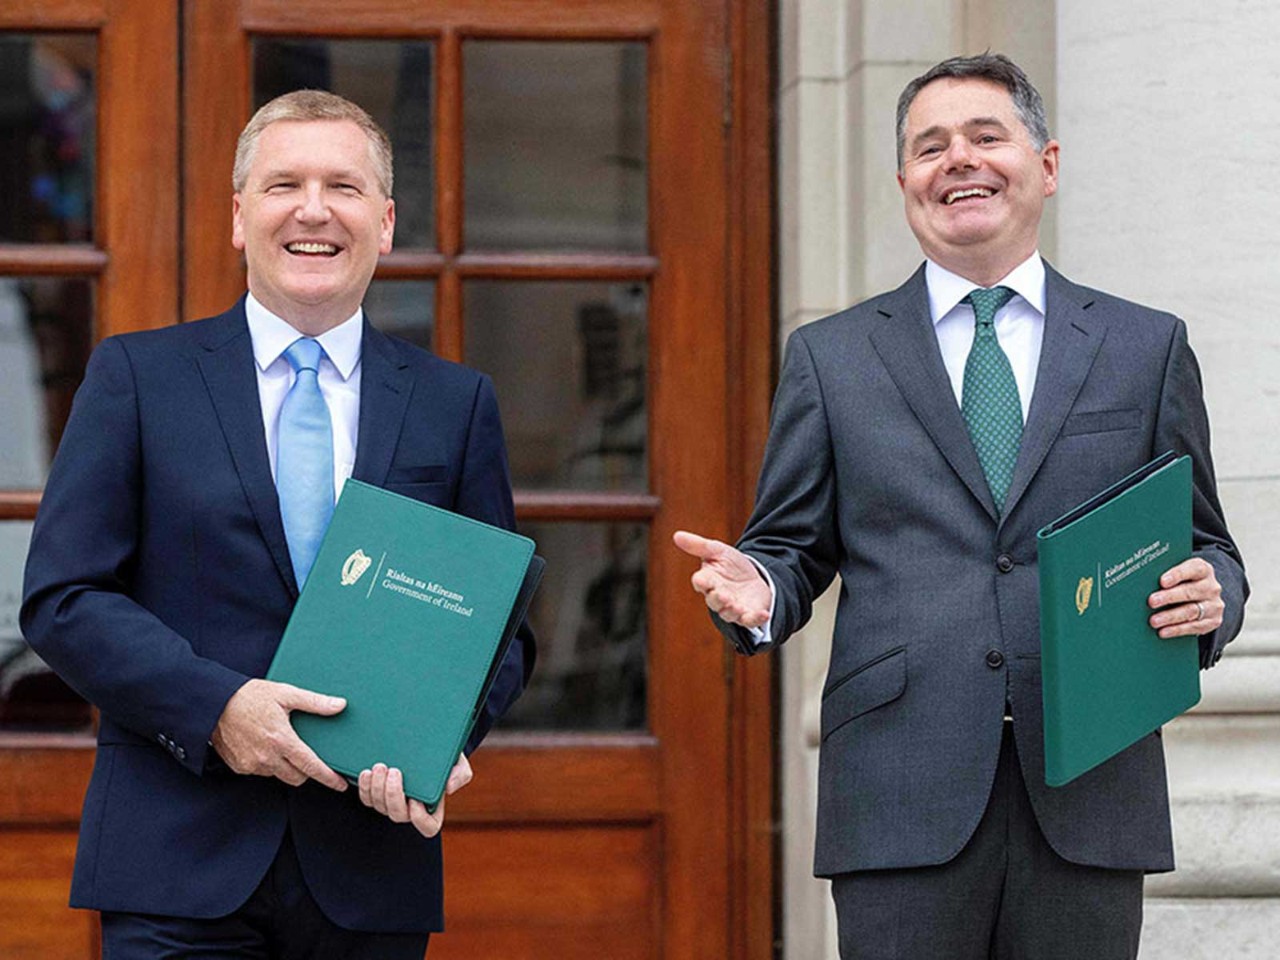 Presented by public expenditure minister Michael McGrath and finance minister Paschal Donohoe, Budget 2022 aims to position Ireland for post-Covid growth by addressing the housing and employment challenges